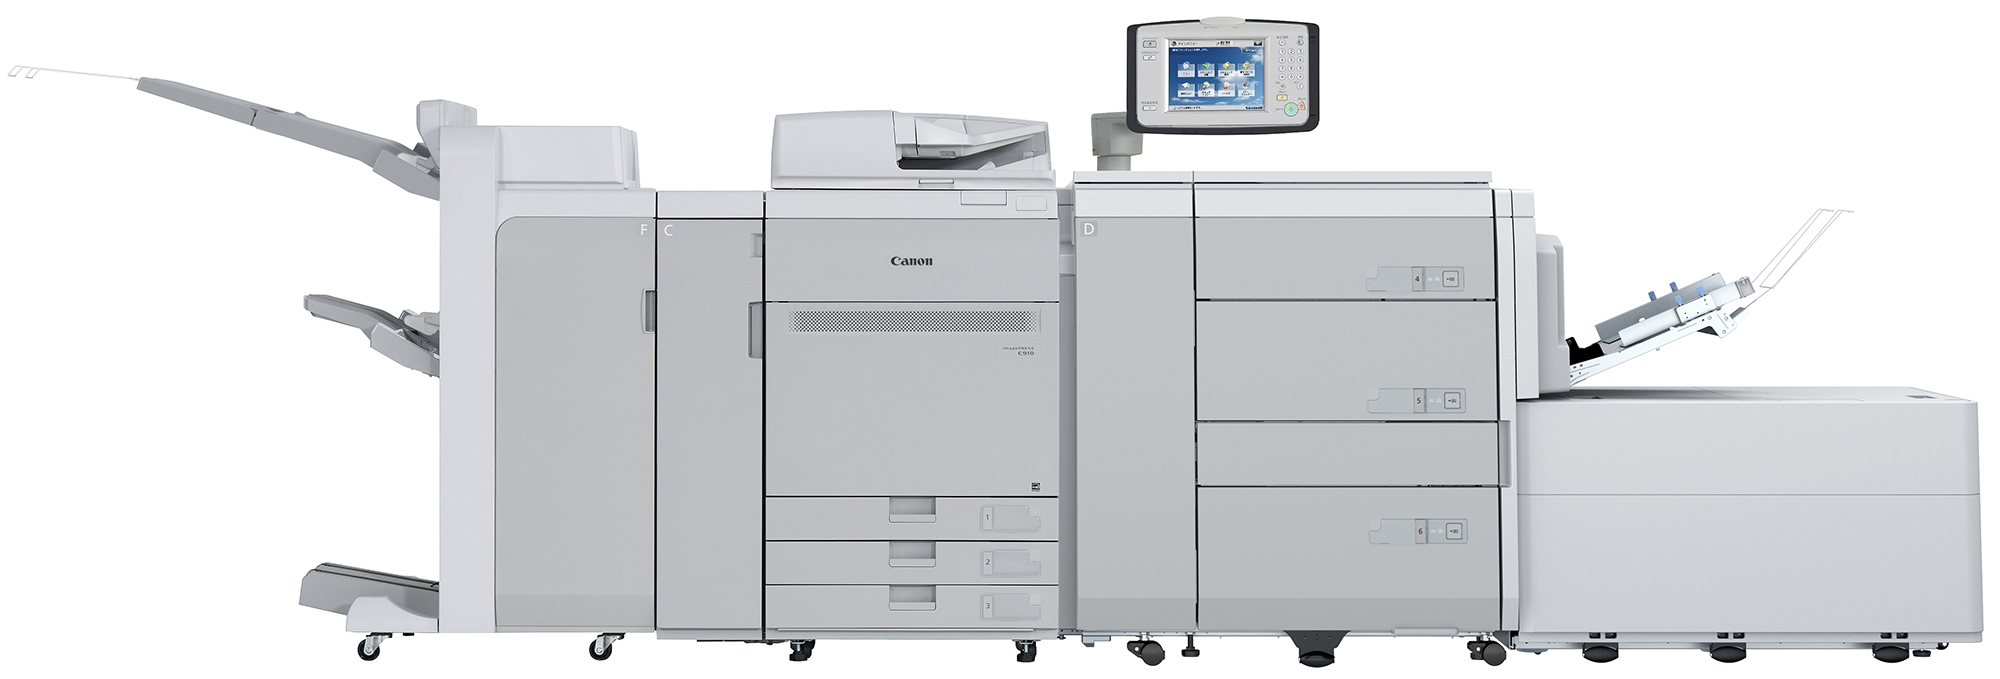 Canon U.S.A. Rolls out New Controllers and Accessory for Its Color Production Presses